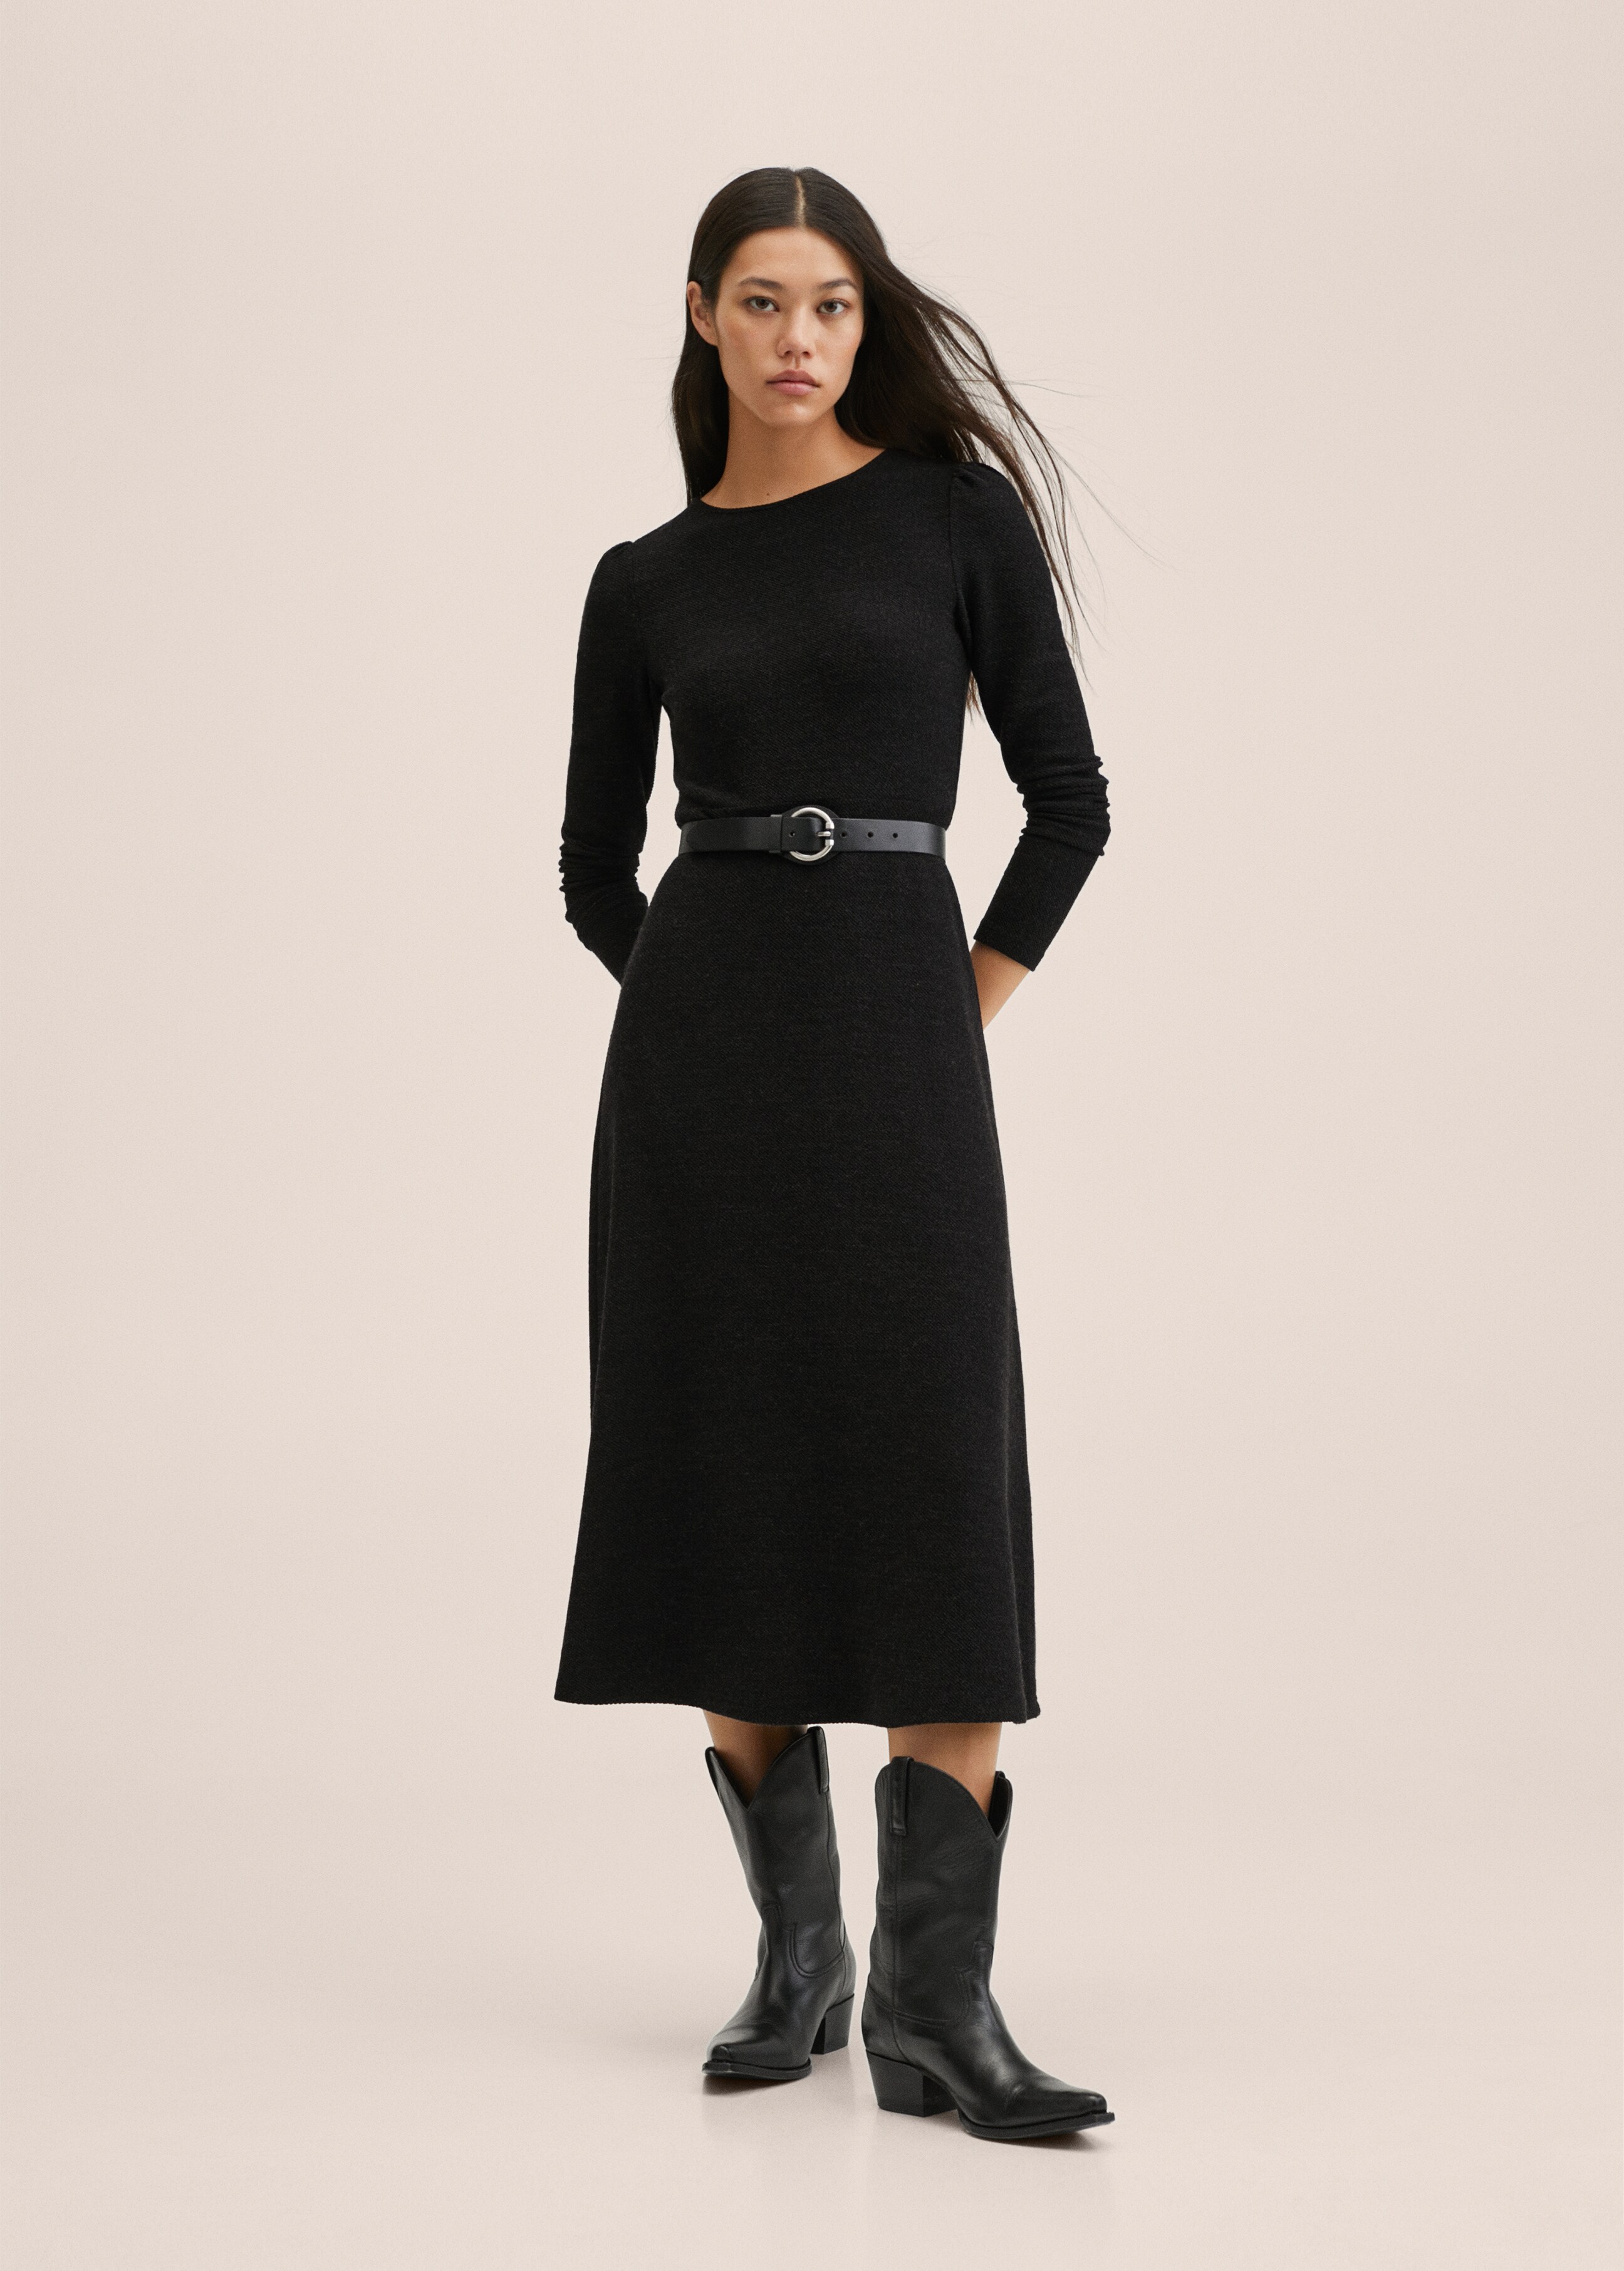 Textured knitted dress - General plane